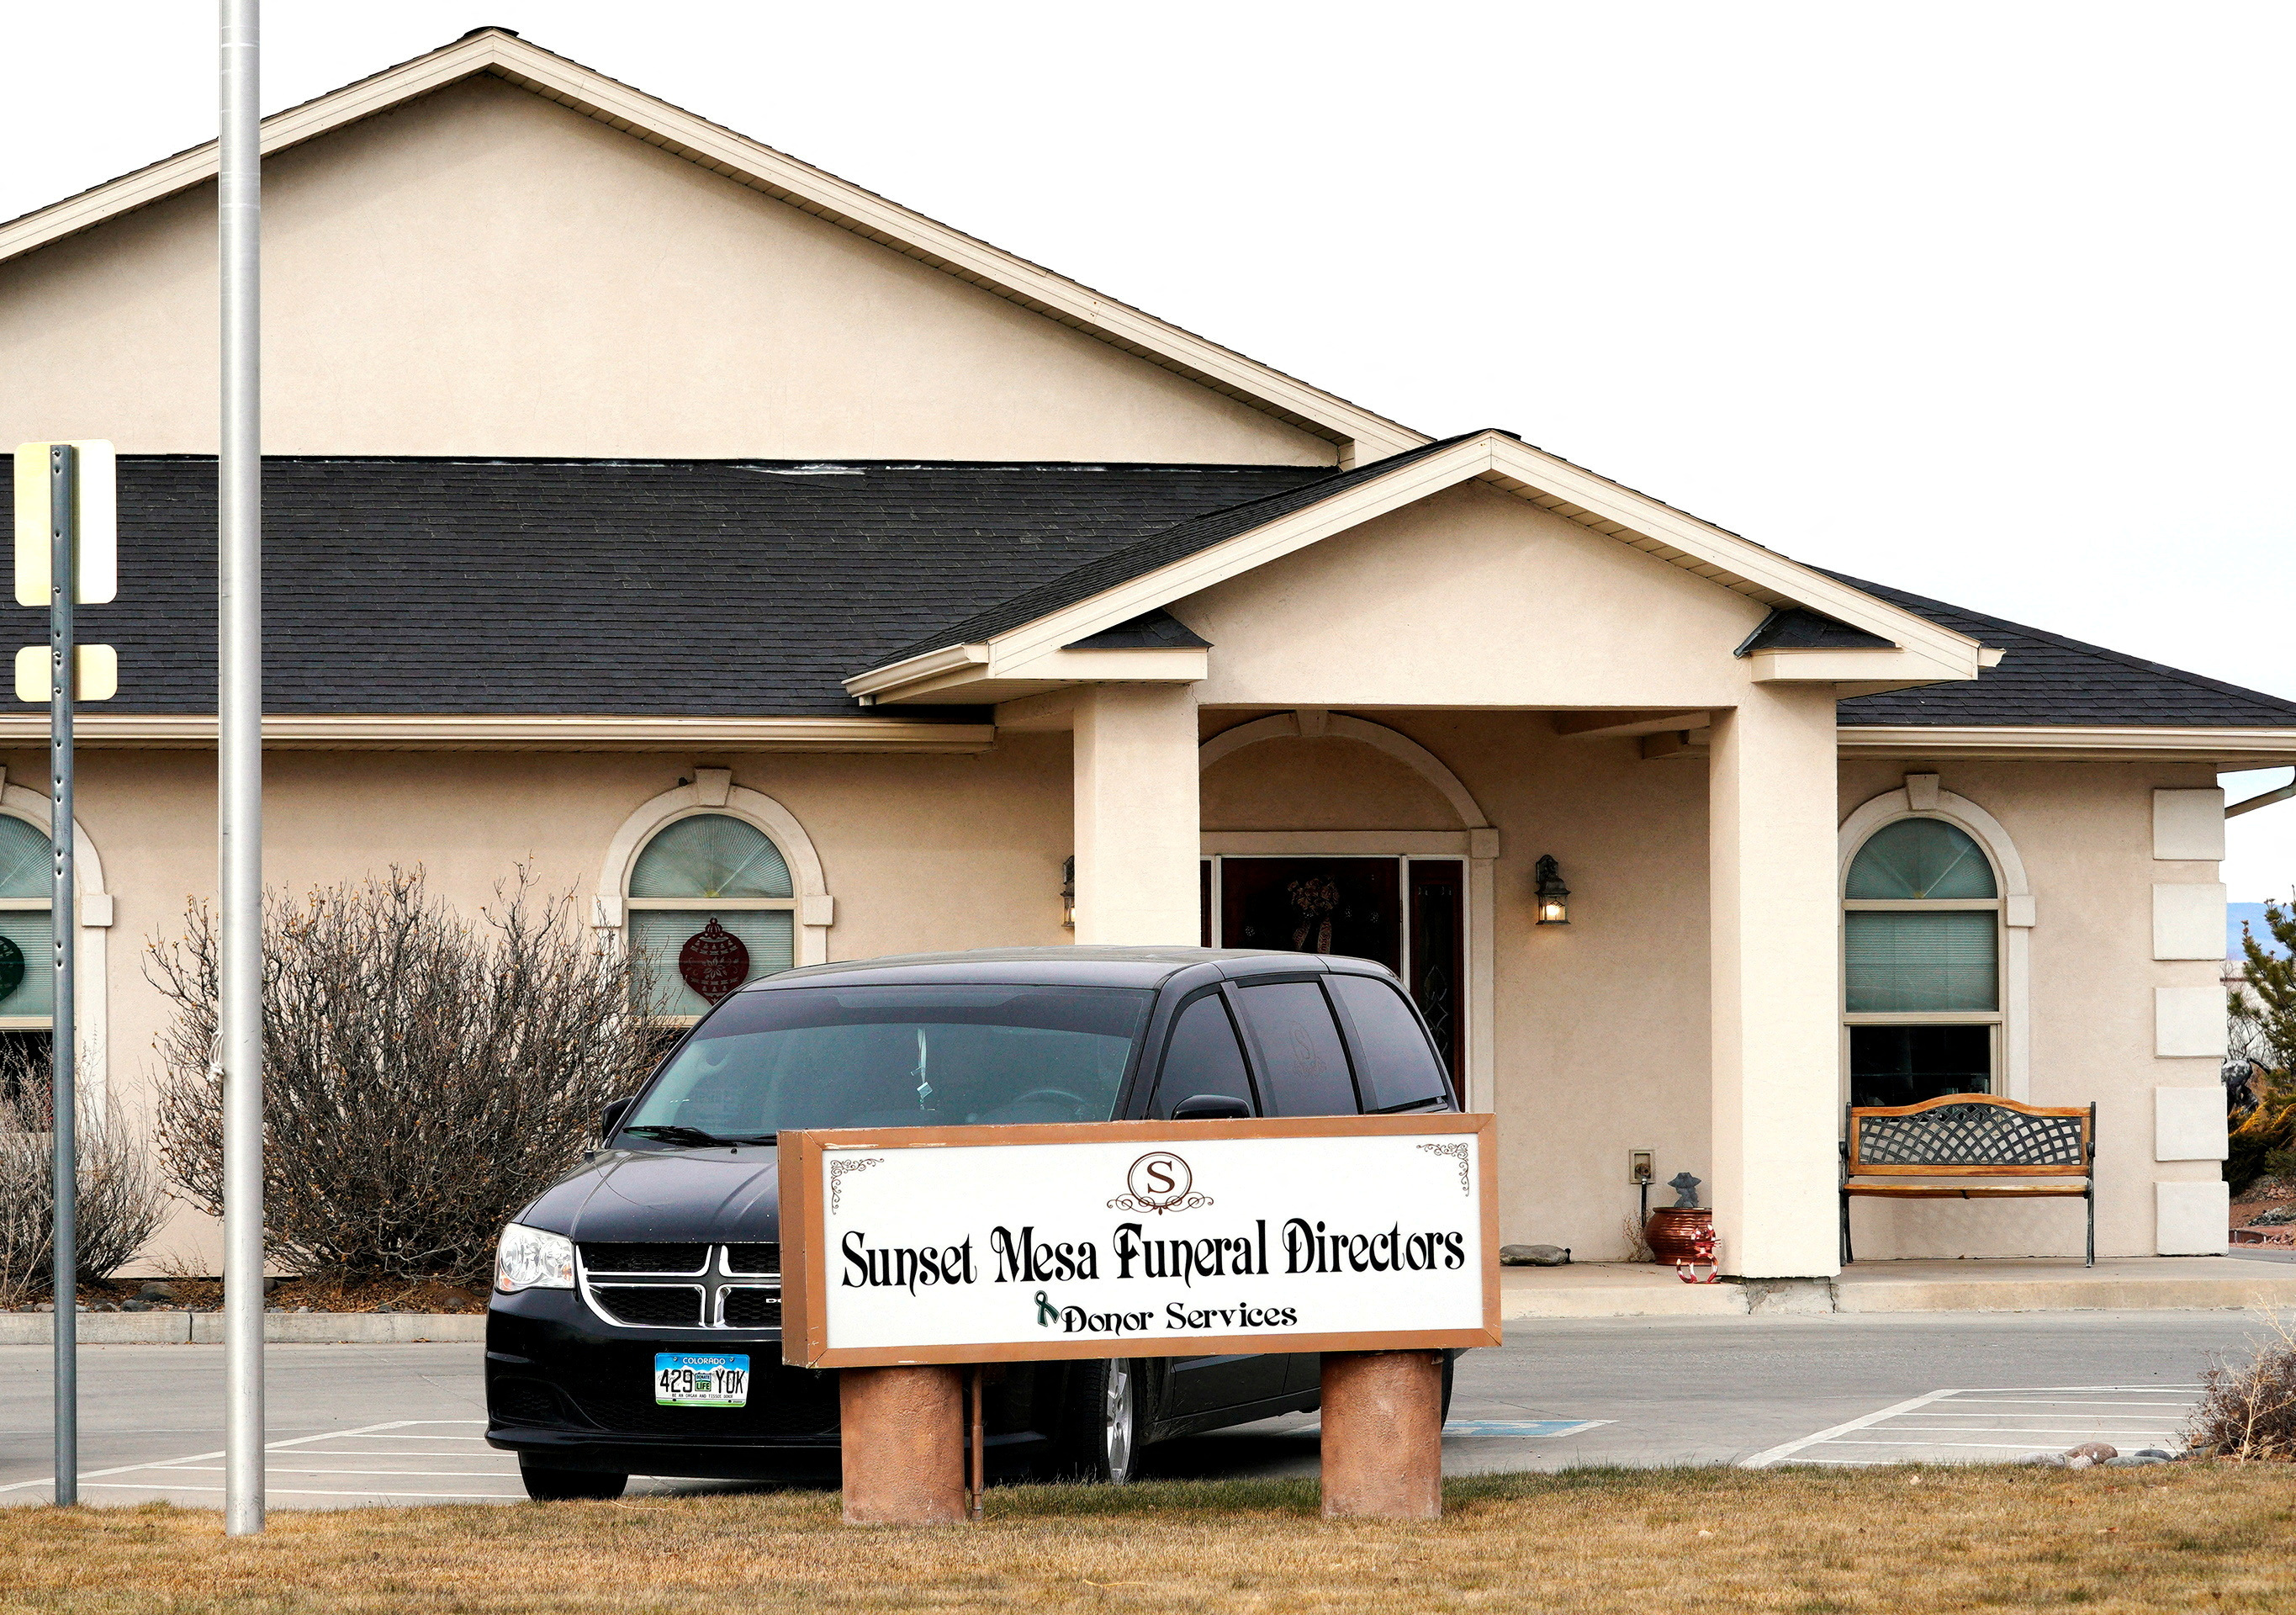 FILE PHOTO: The Sunset Mesa Funeral Directors and Donor Services building in Montrose, Colorado, U.S., December 16, 2017. REUTERS/Rick Wilking/File Photo/File Photo